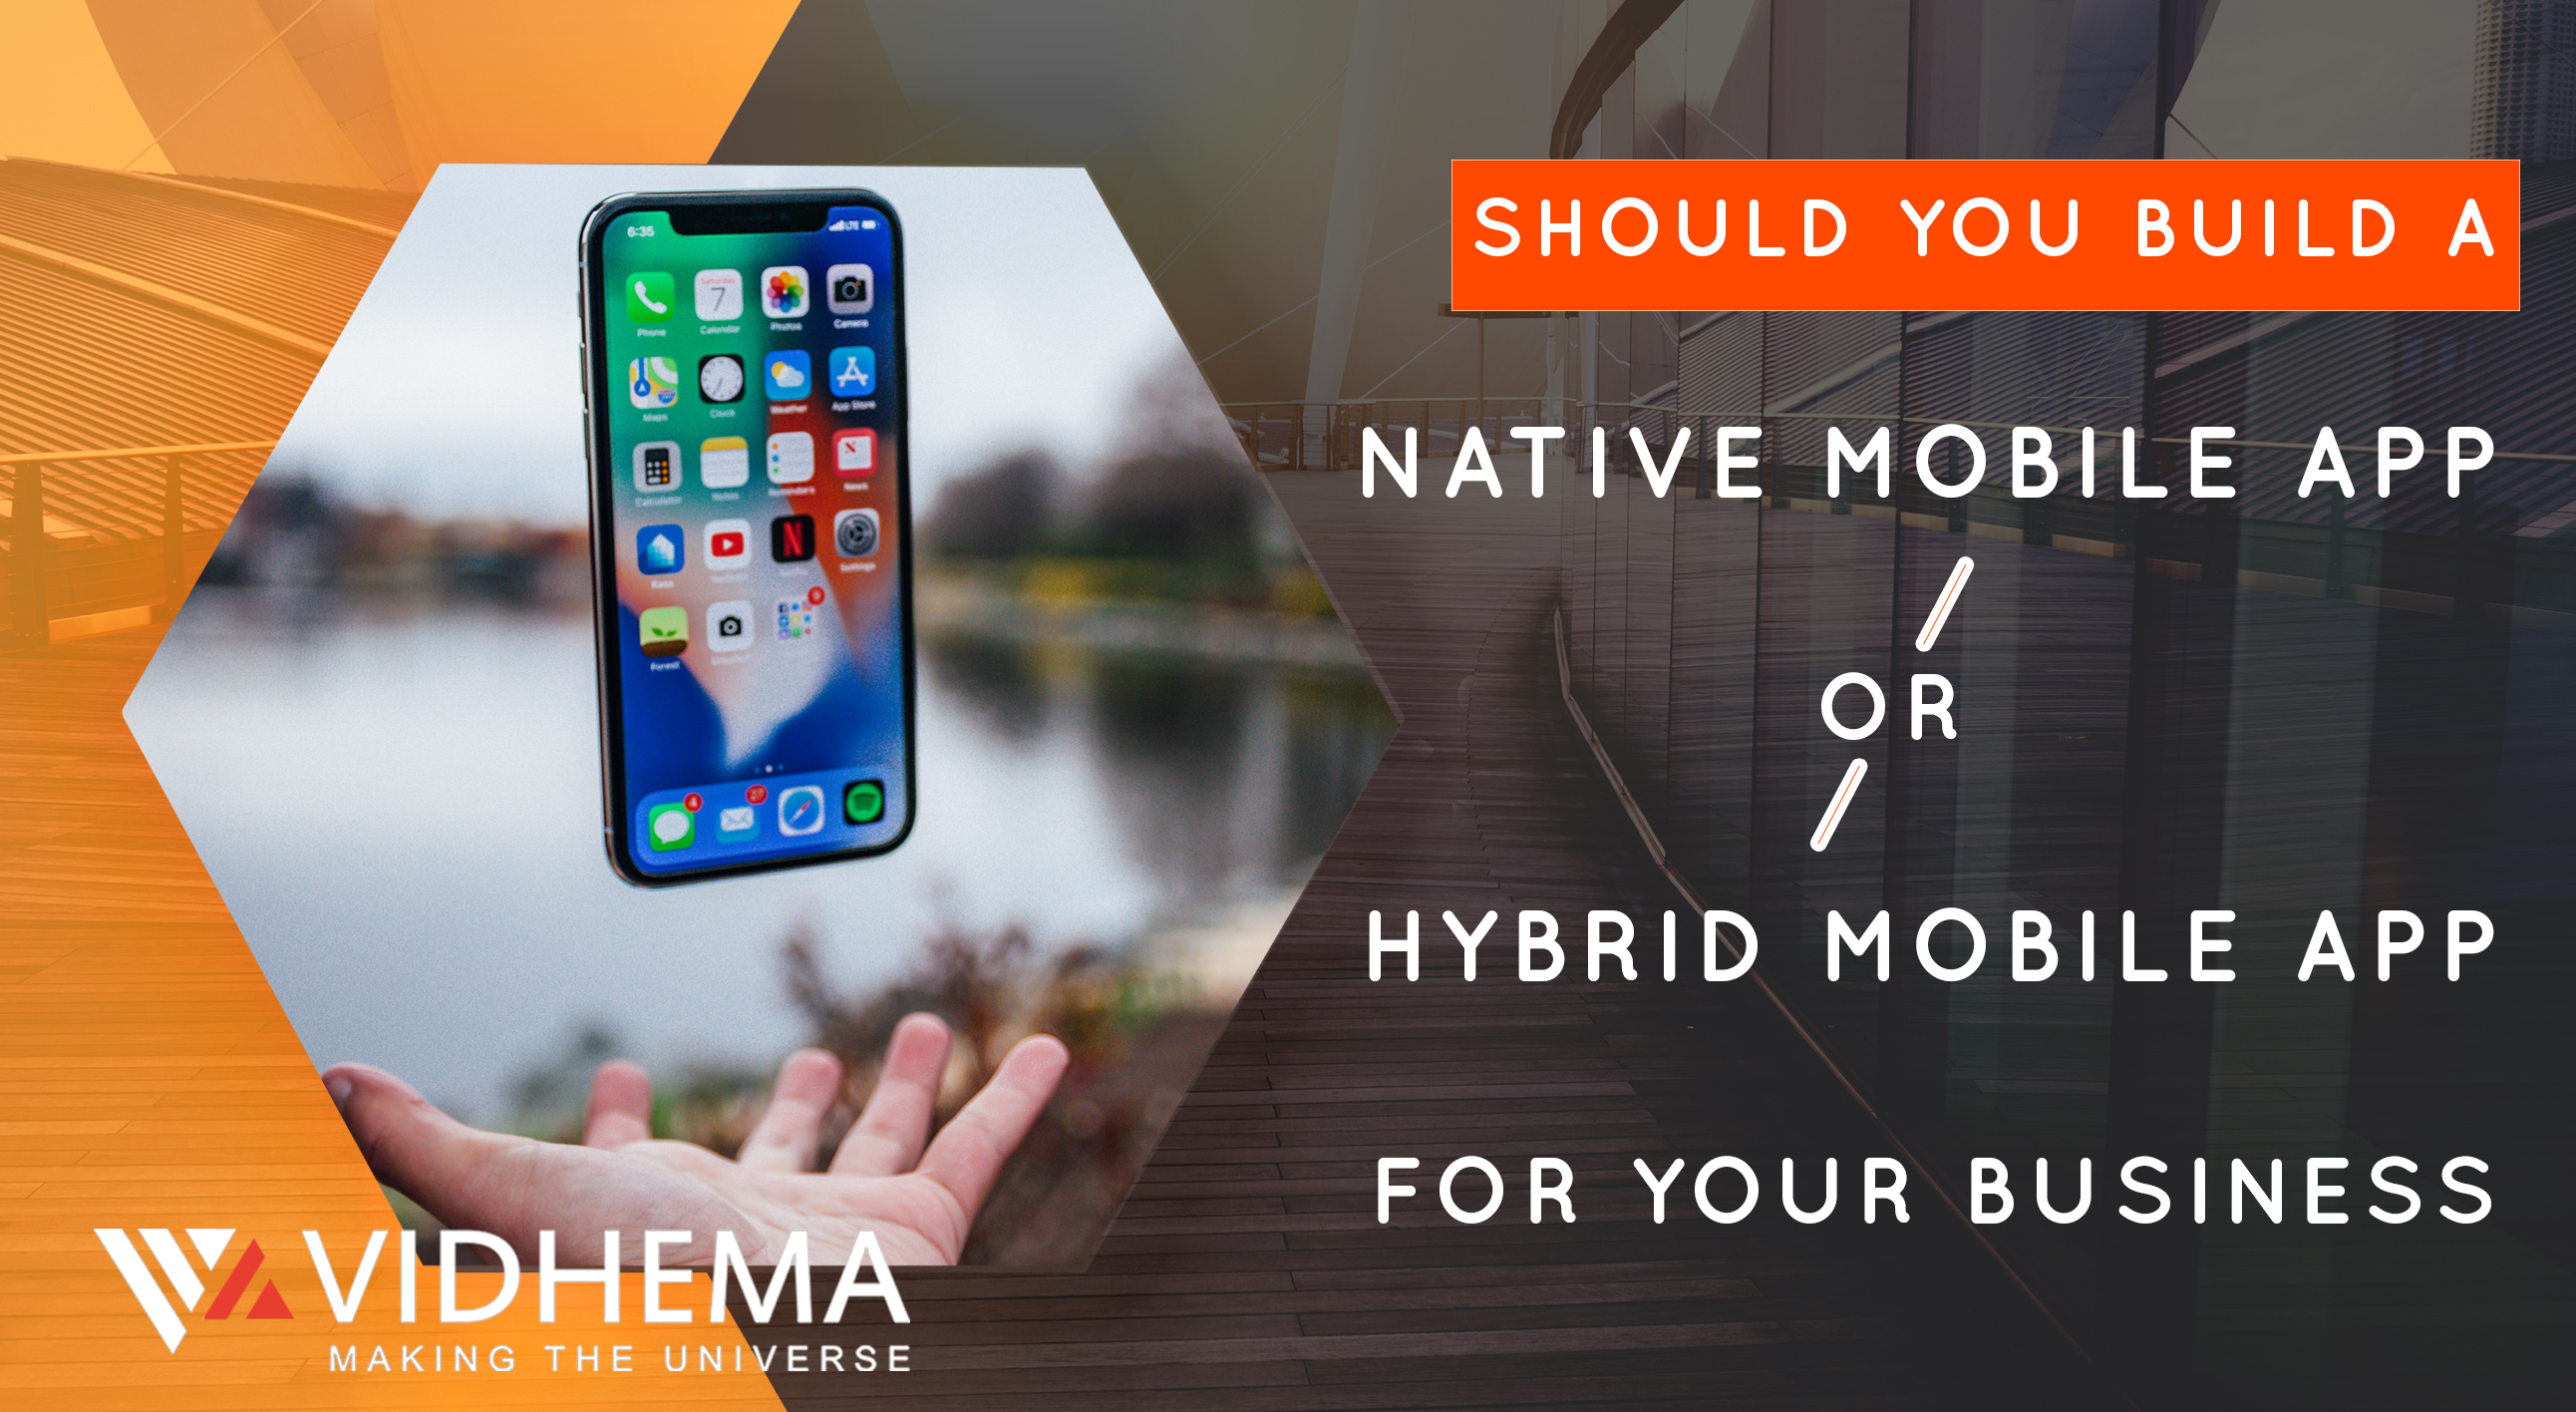 Should You Build A Native Mobile App Or Hybrid Mobile App For Your Business?